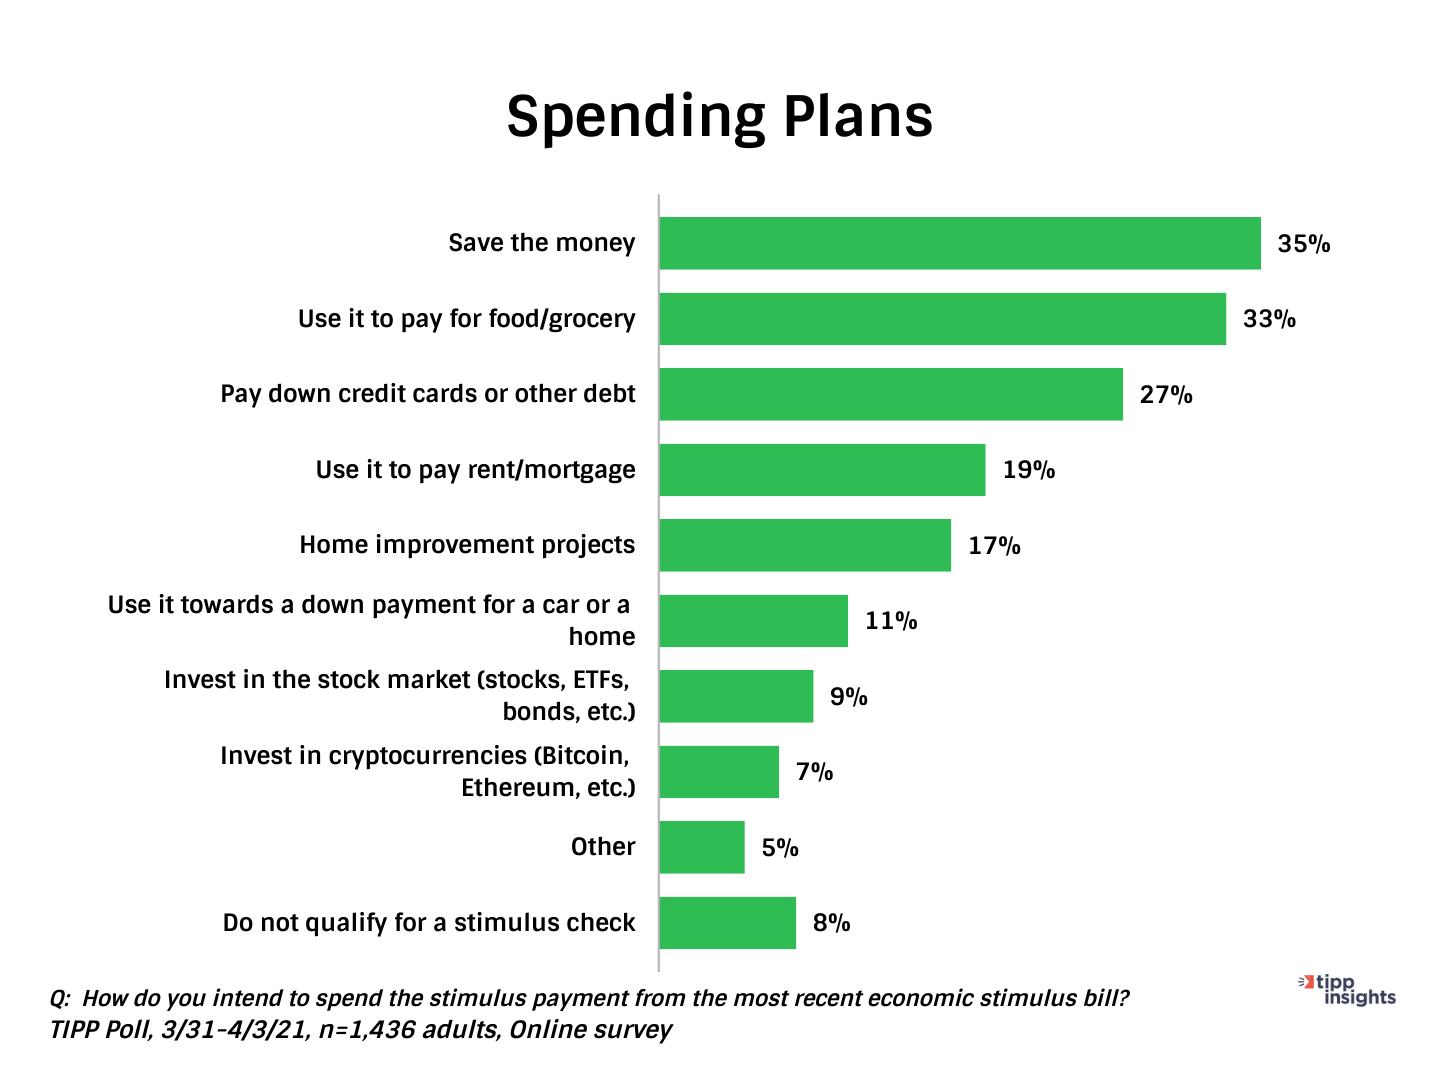 TIPP Poll Results: American Spending plans for 2020 Stimulus Checks